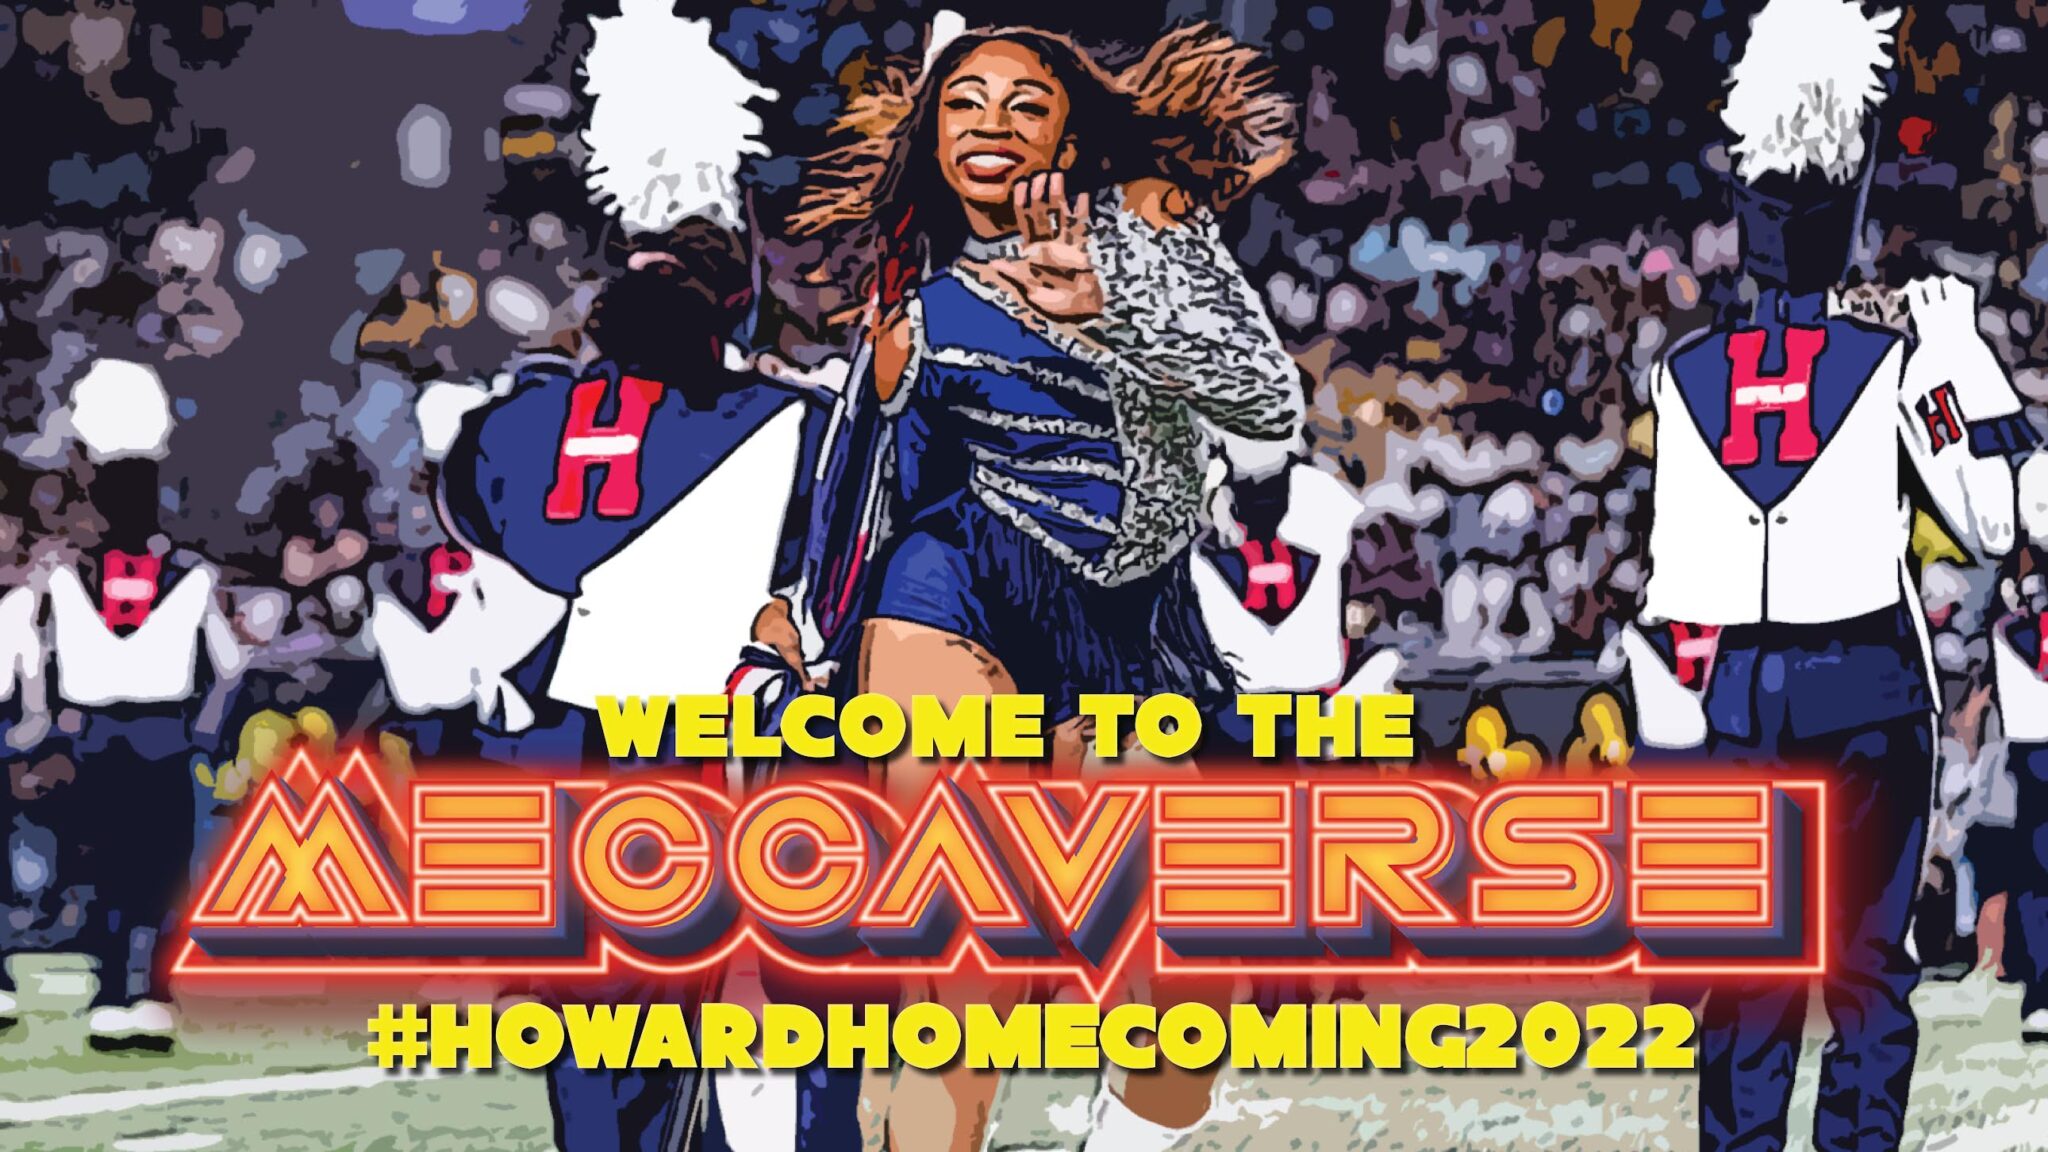 ‘The Meccaverse’ Howard University Announces Theme for 2022